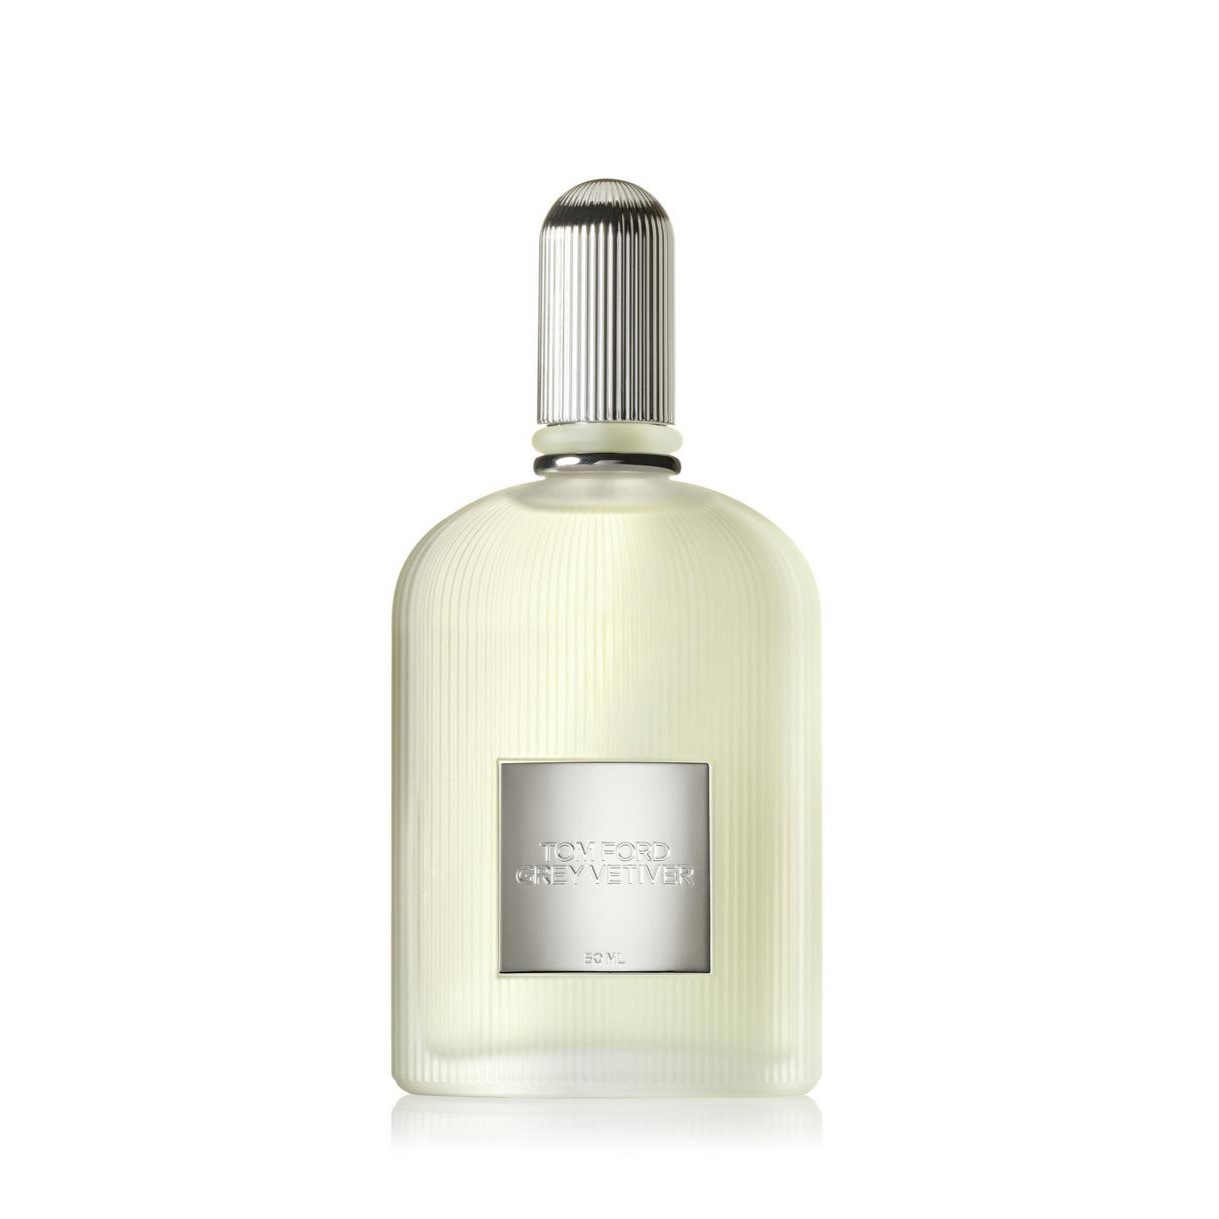 Tom Ford Grey Vetiver: One of the Driest Scents on Today’s Market ...